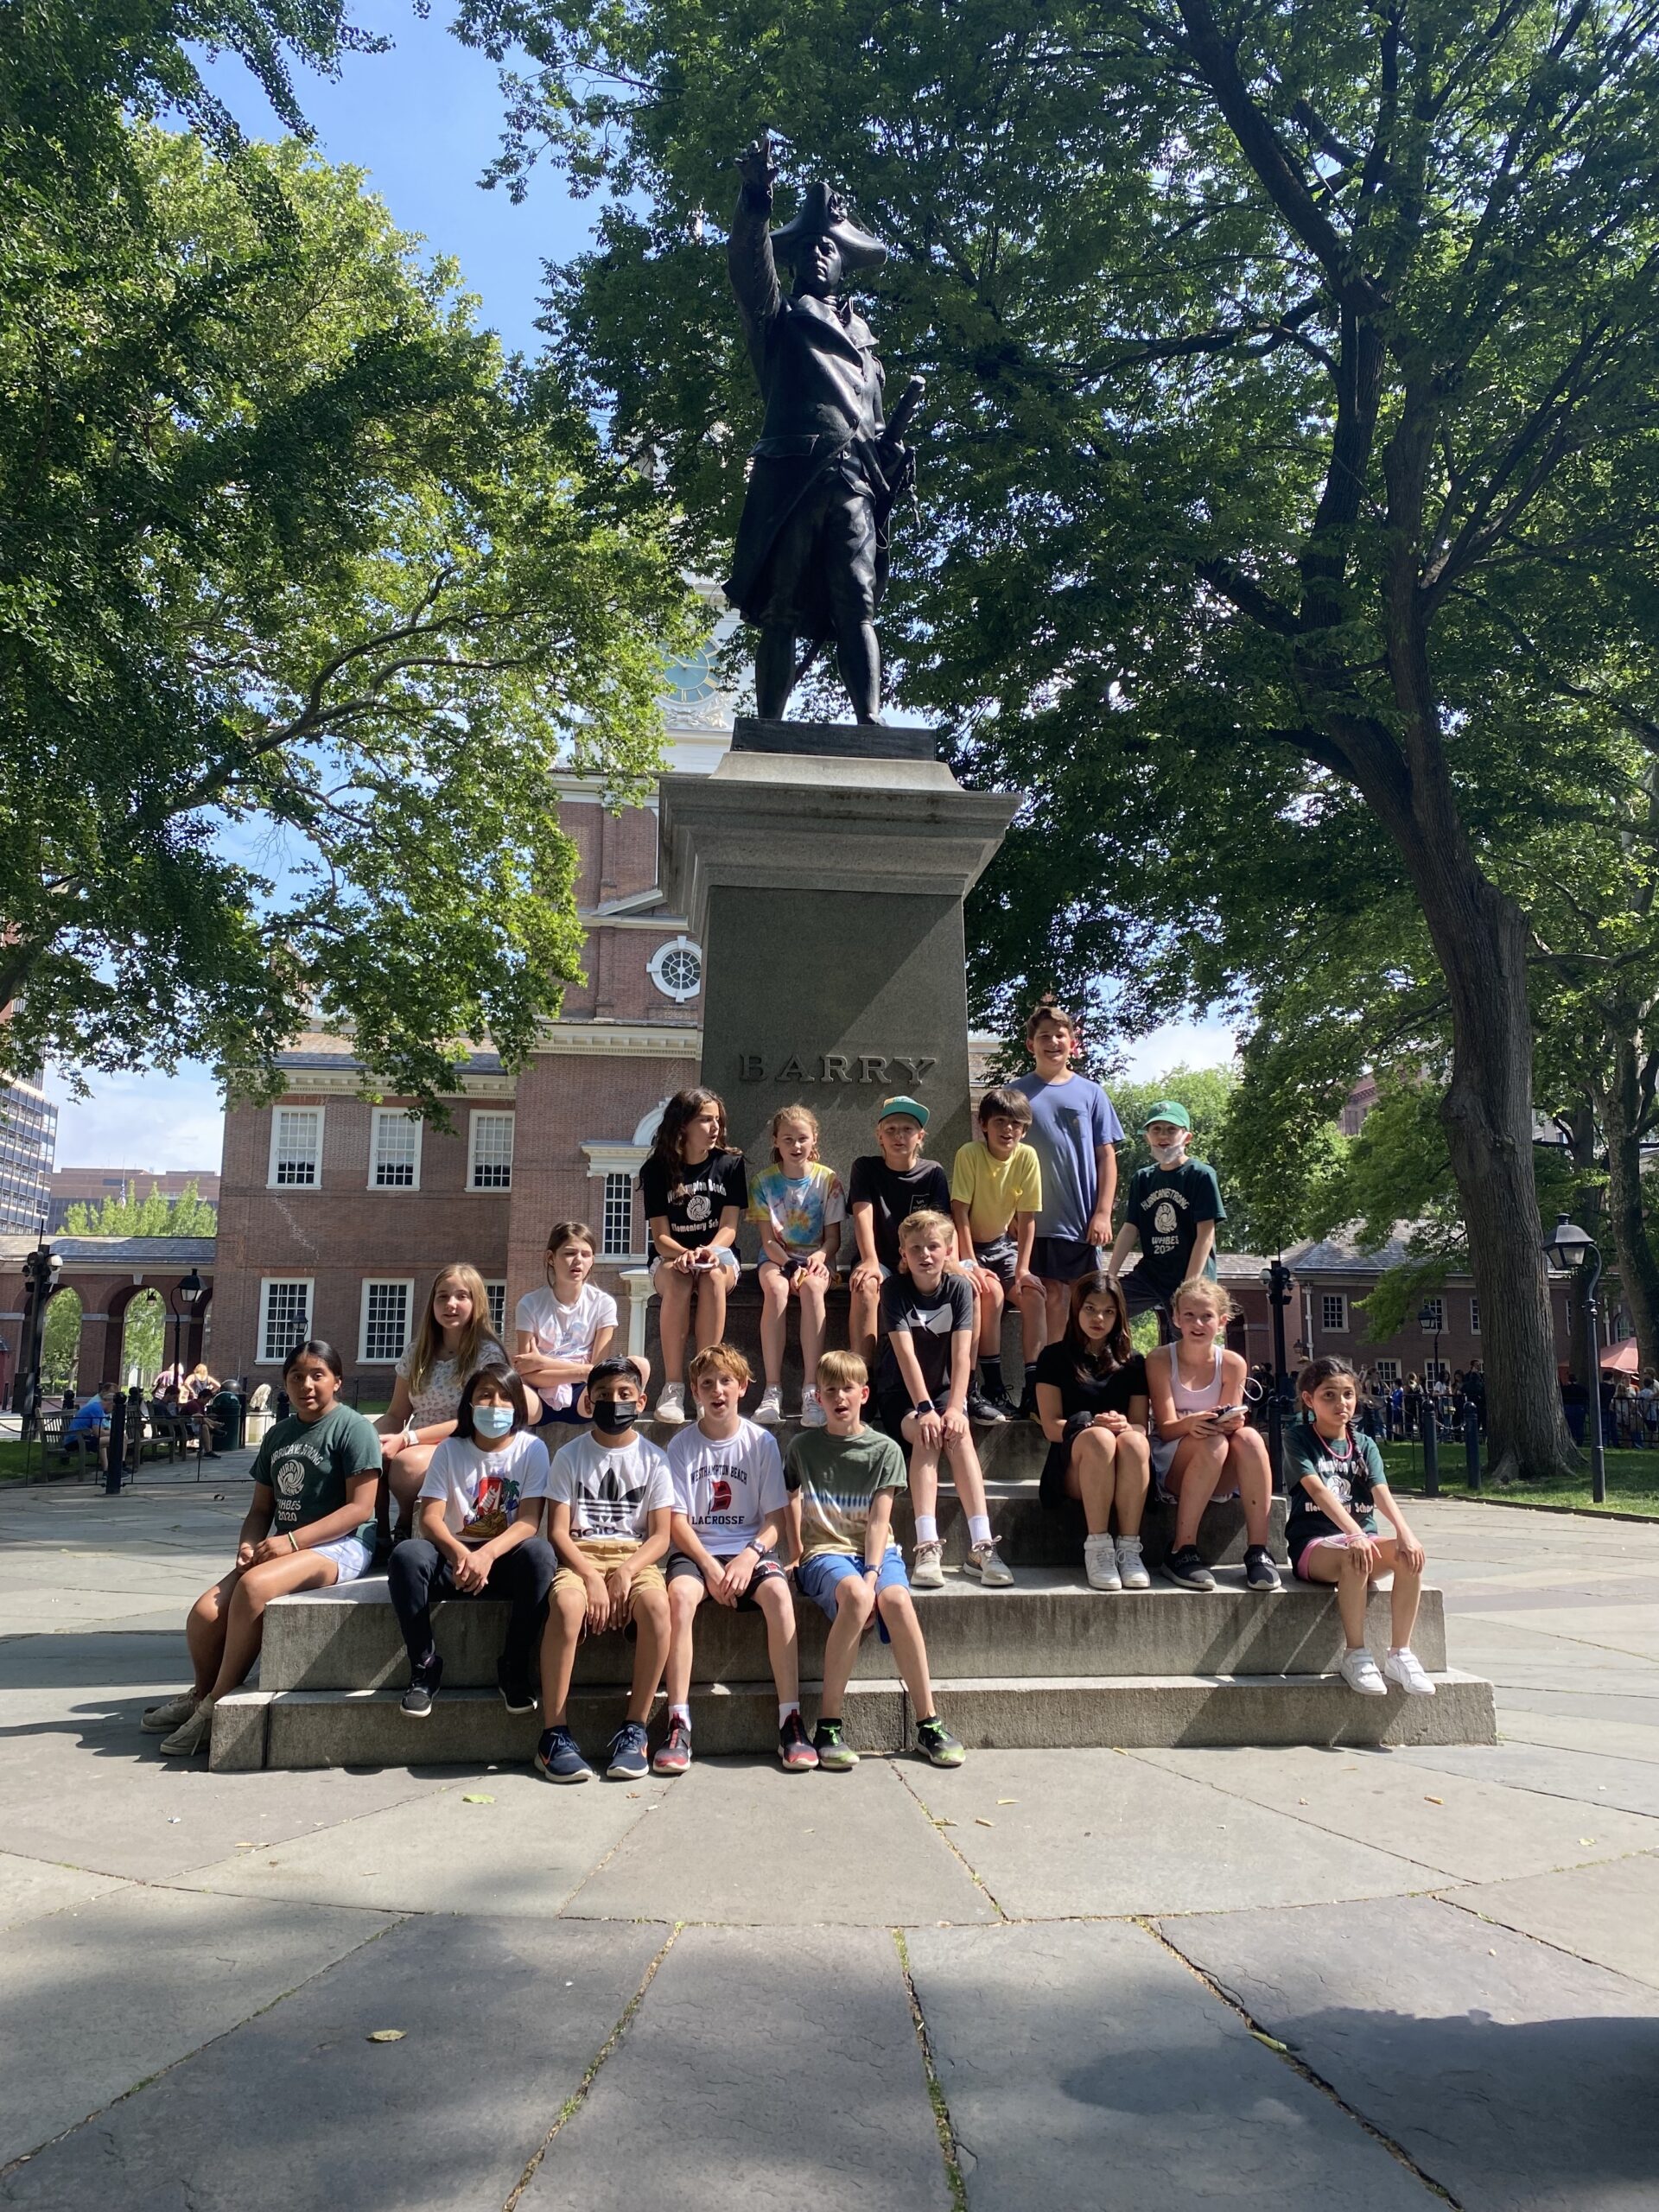 Fifth grade students at Westhampton Beach Elementary School recently took an educational field trip to Philadelphia. They explored the city’s vast history at sites such as the National Constitution Center and Elfreth’s Alley Museum, where the exhibits correlated to the social studies curriculum they have been studying. COURTESY WESTHAMPTON BEACH SCHOOL DISTRICT